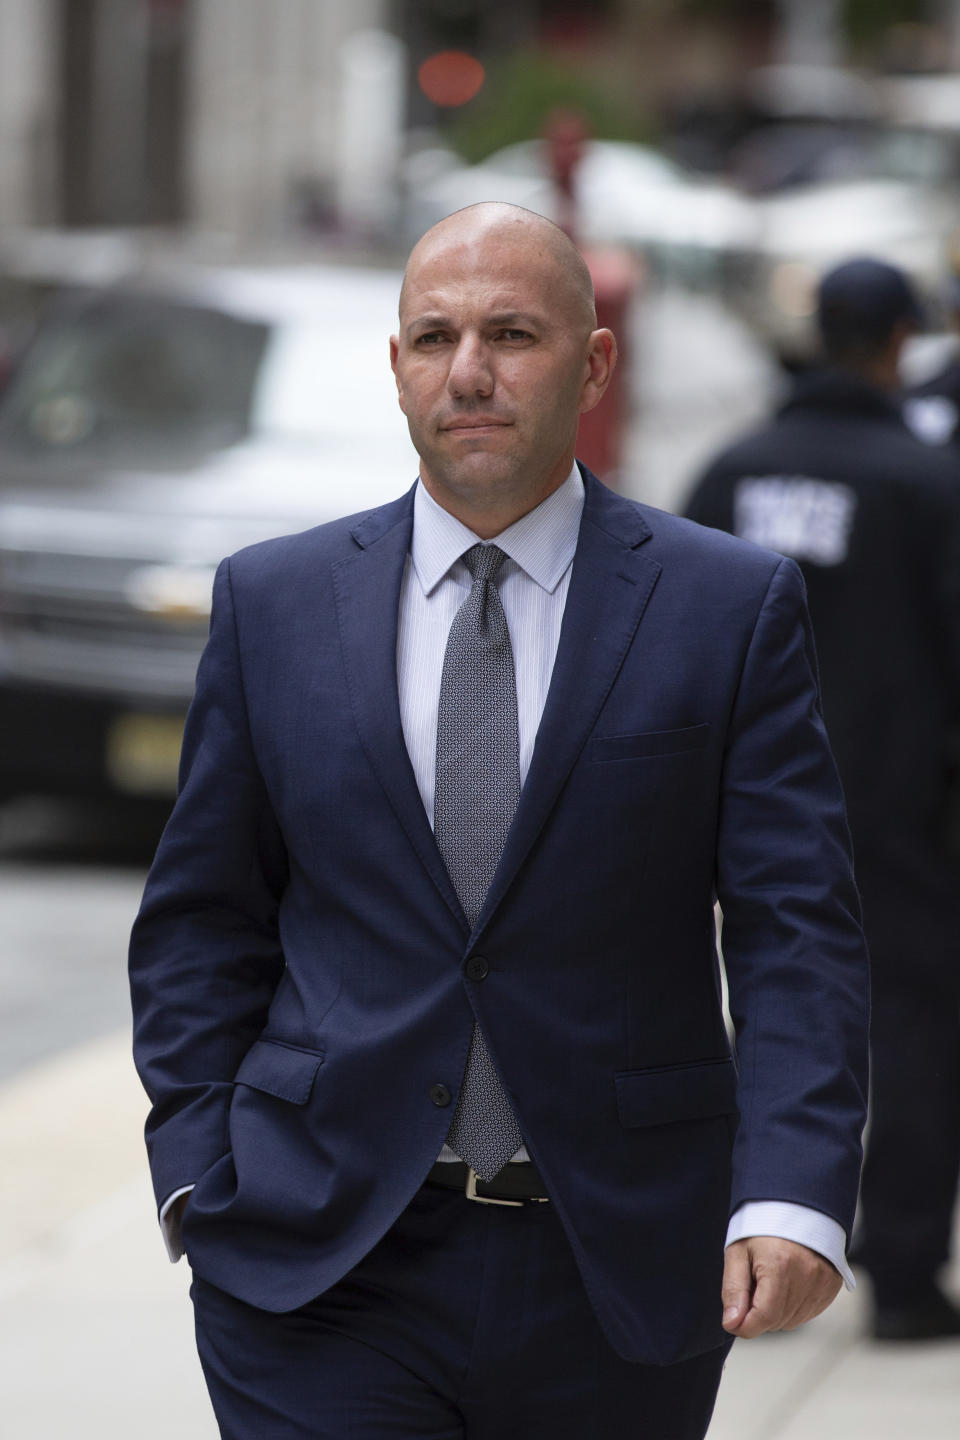 David Correia arrives at federal court, Thursday, Oct. 17, 2019, in New York. Correia and Andrey Kukushkin were set to be arraigned Thursday on charges they conspired with associates of Rudy Giuliani to make illegal campaign contributions. (AP Photo/Kevin Hagen)